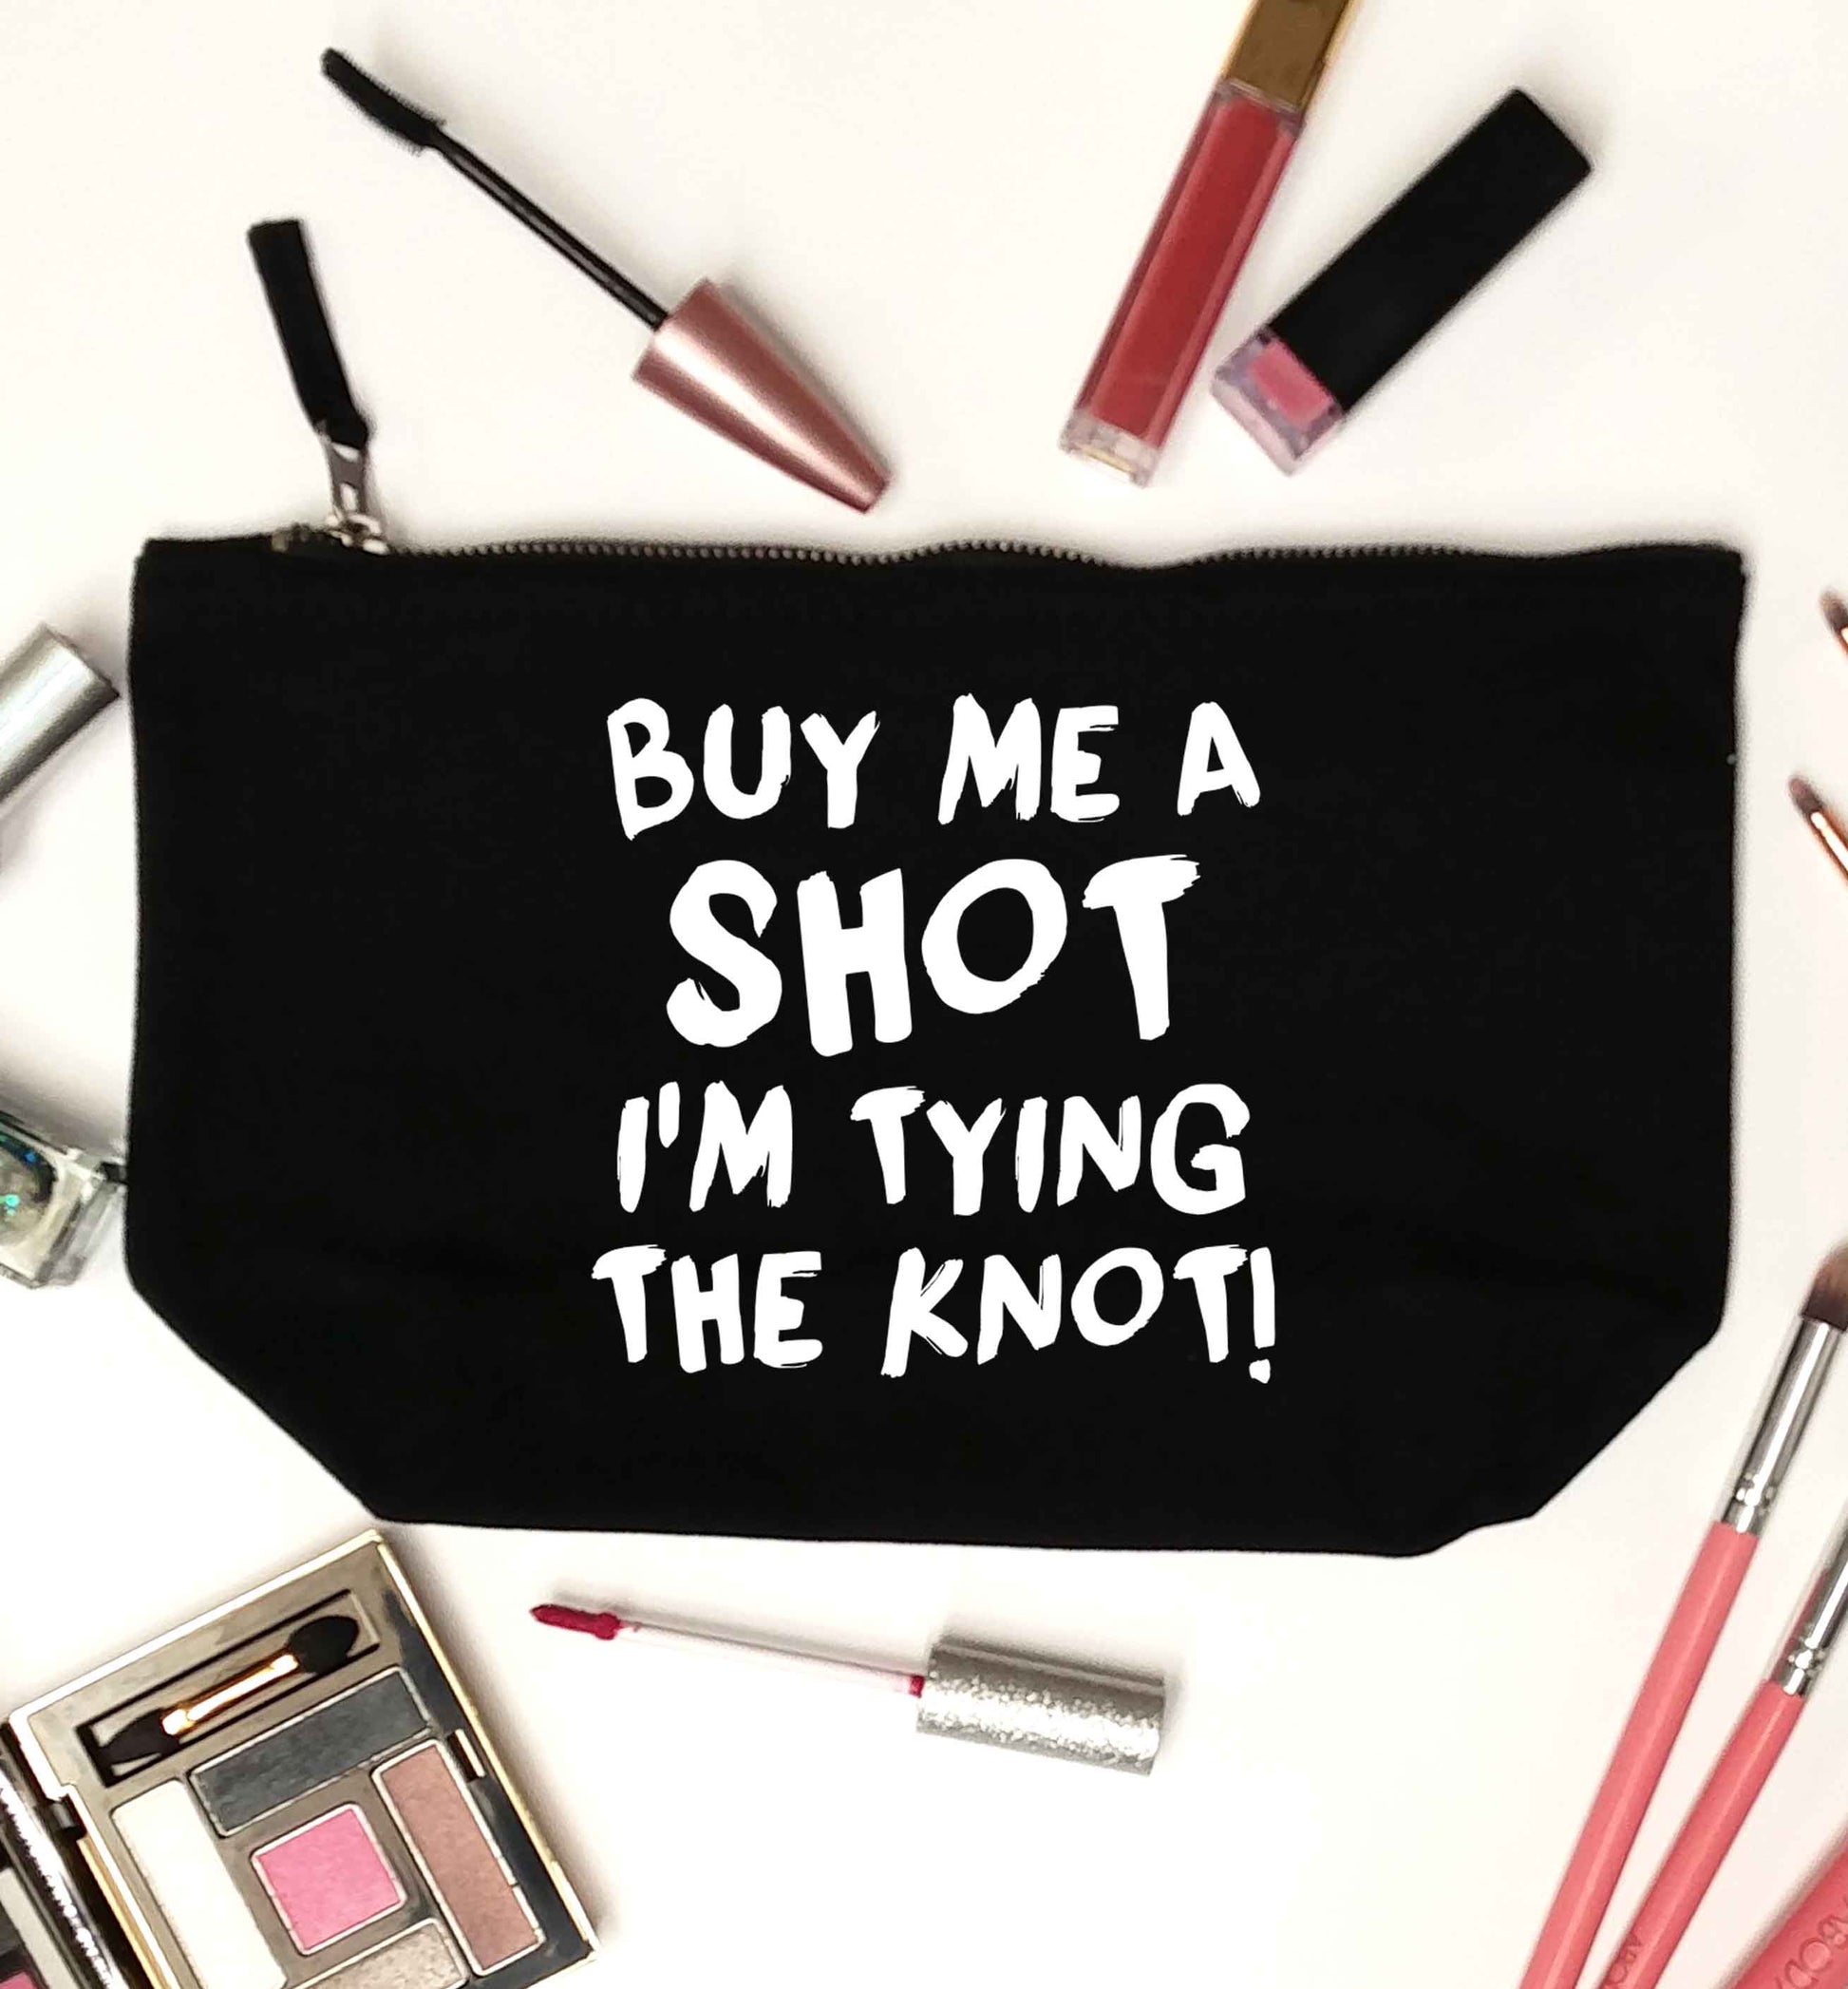 Get motivated and get fit for your big day! Our workout quotes and designs will get you ready to sweat! Perfect for any bride, groom or bridesmaid to be!  black makeup bag